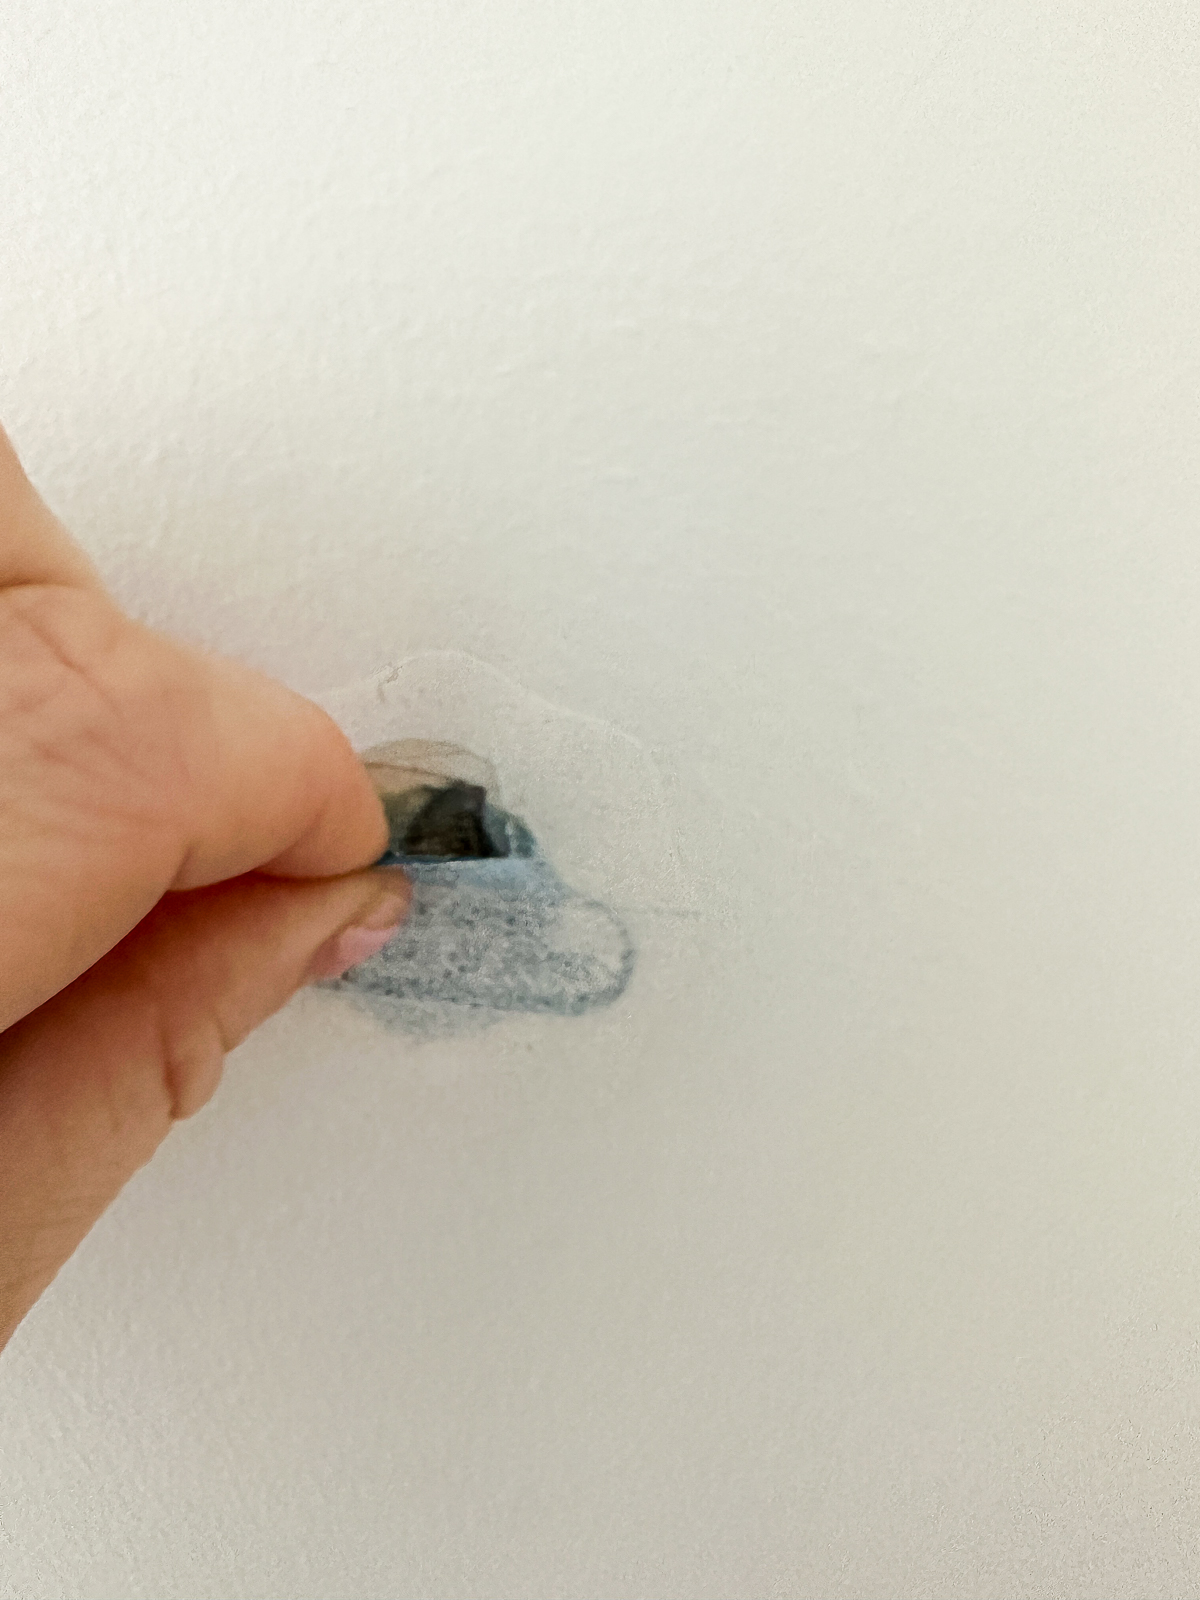 pulling the tab from the patch off the wall